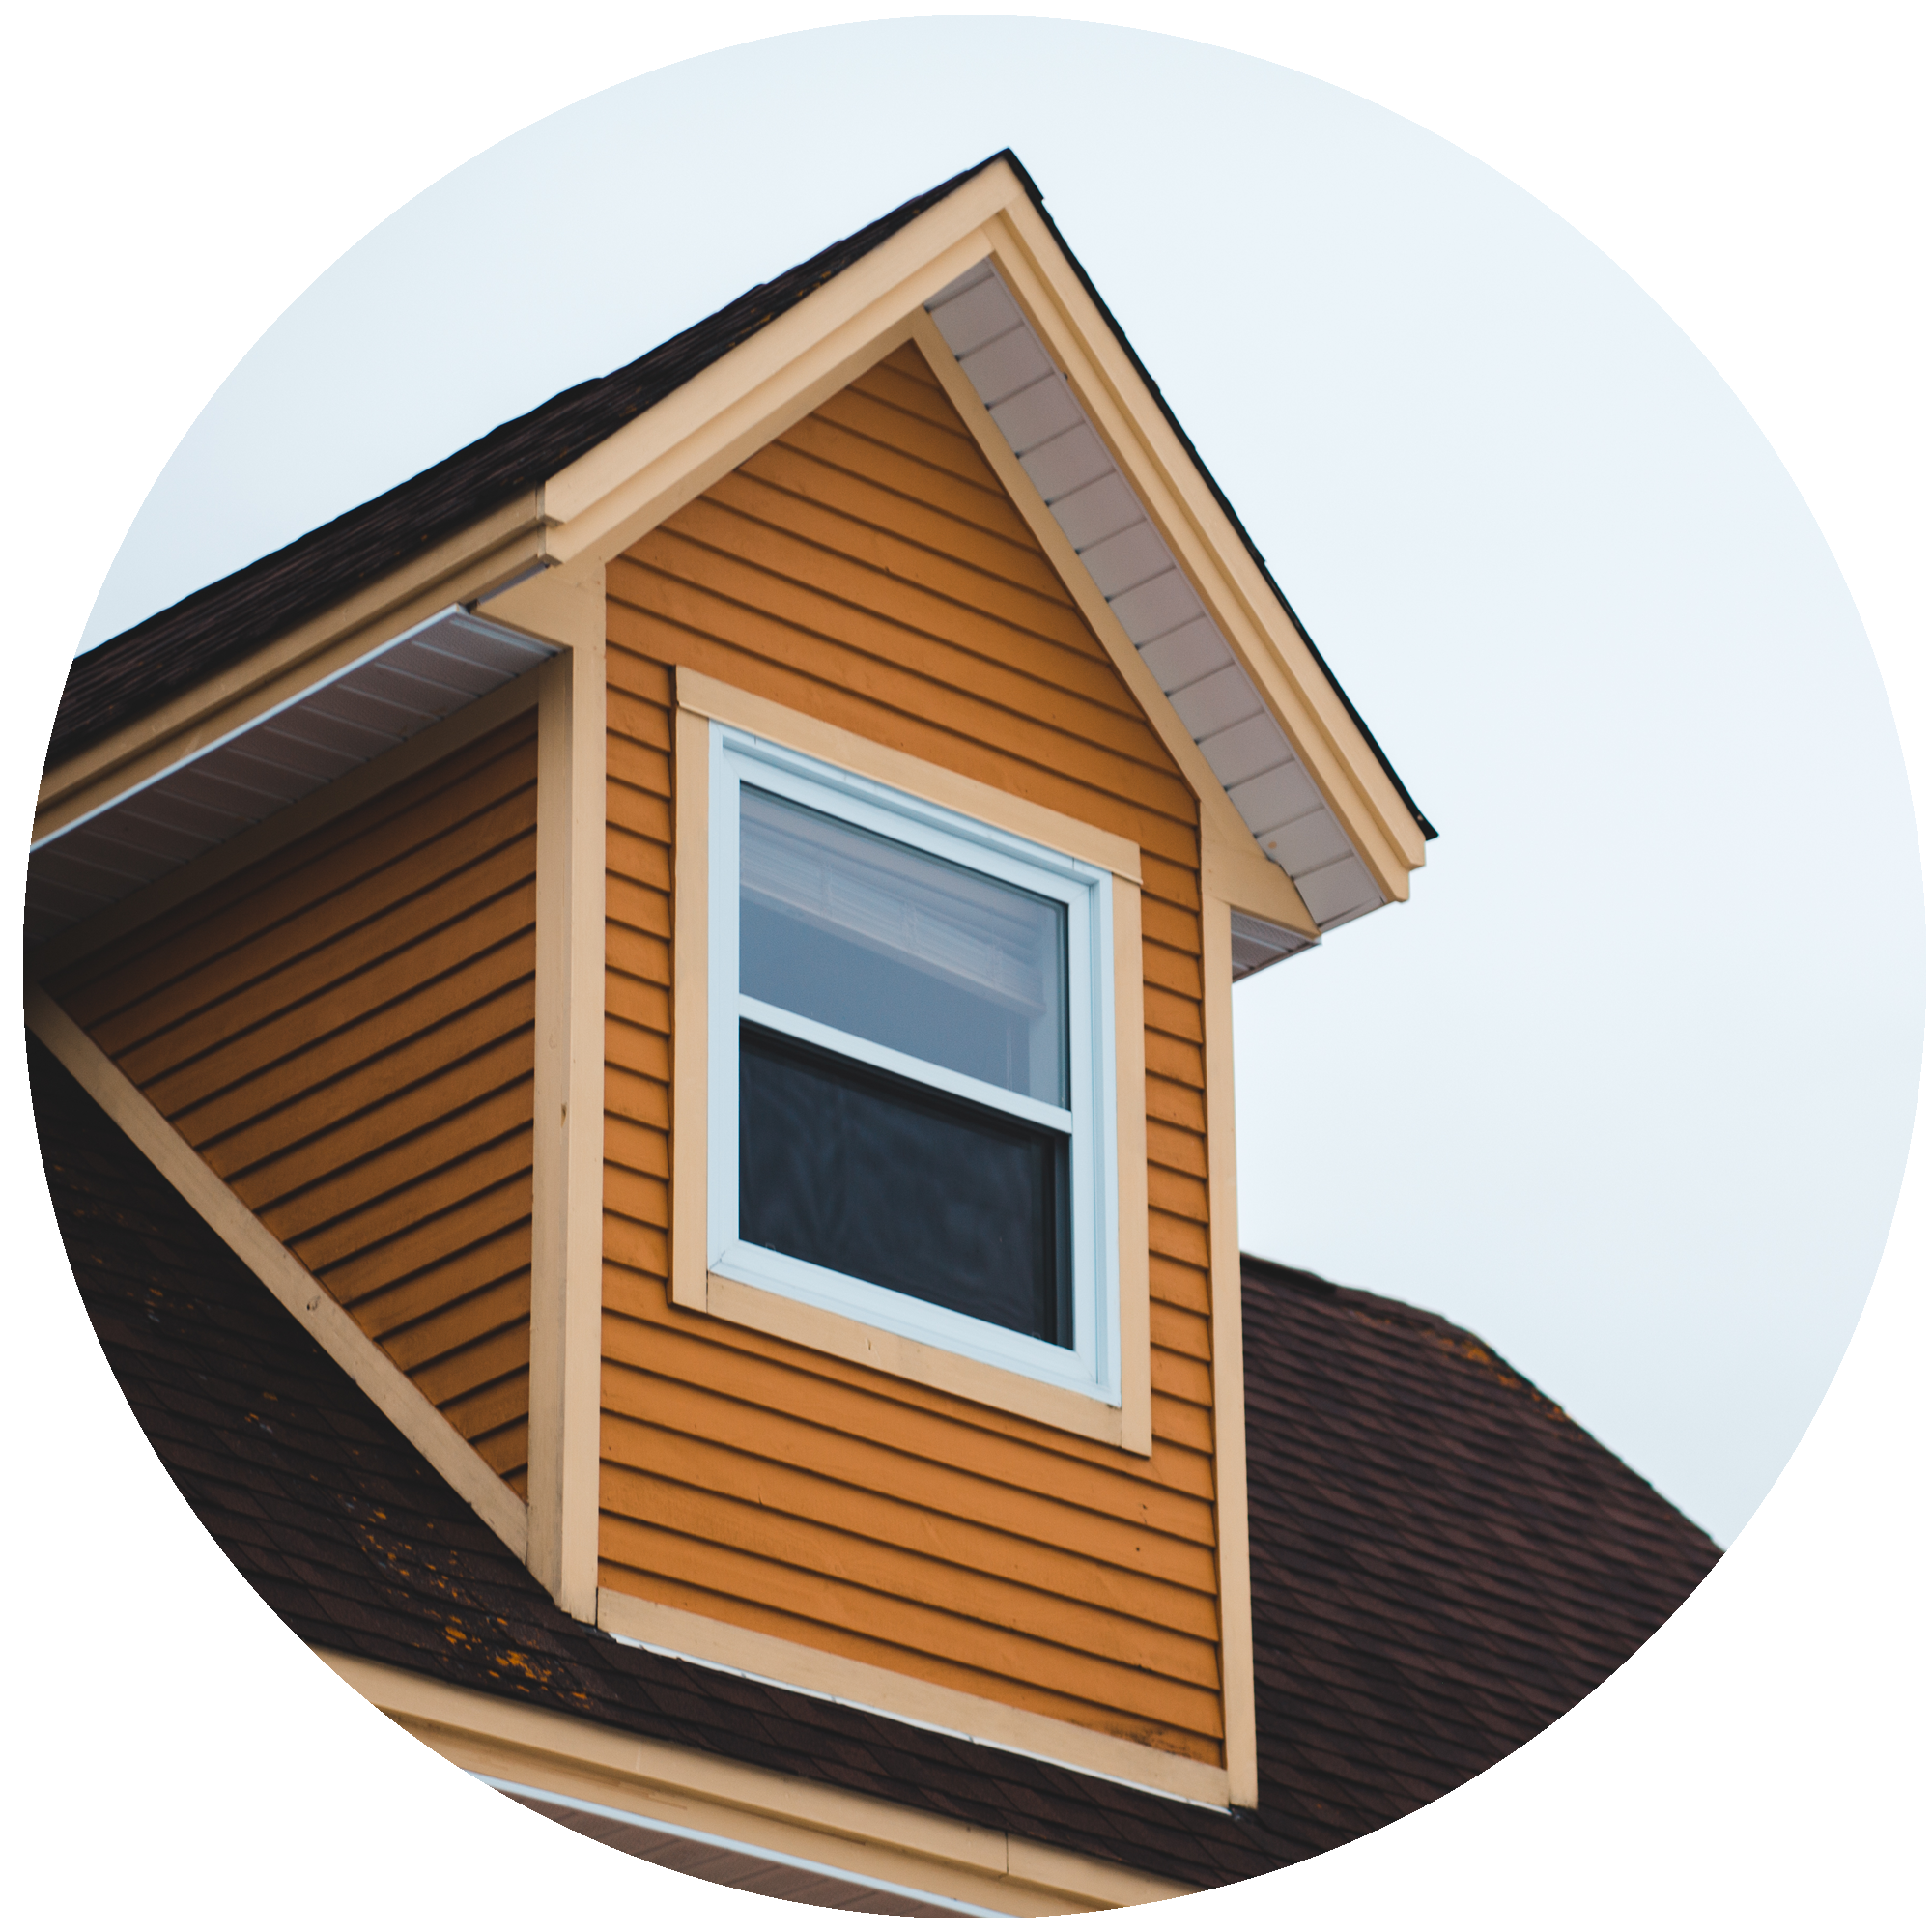 Roof and Windows Image Icon